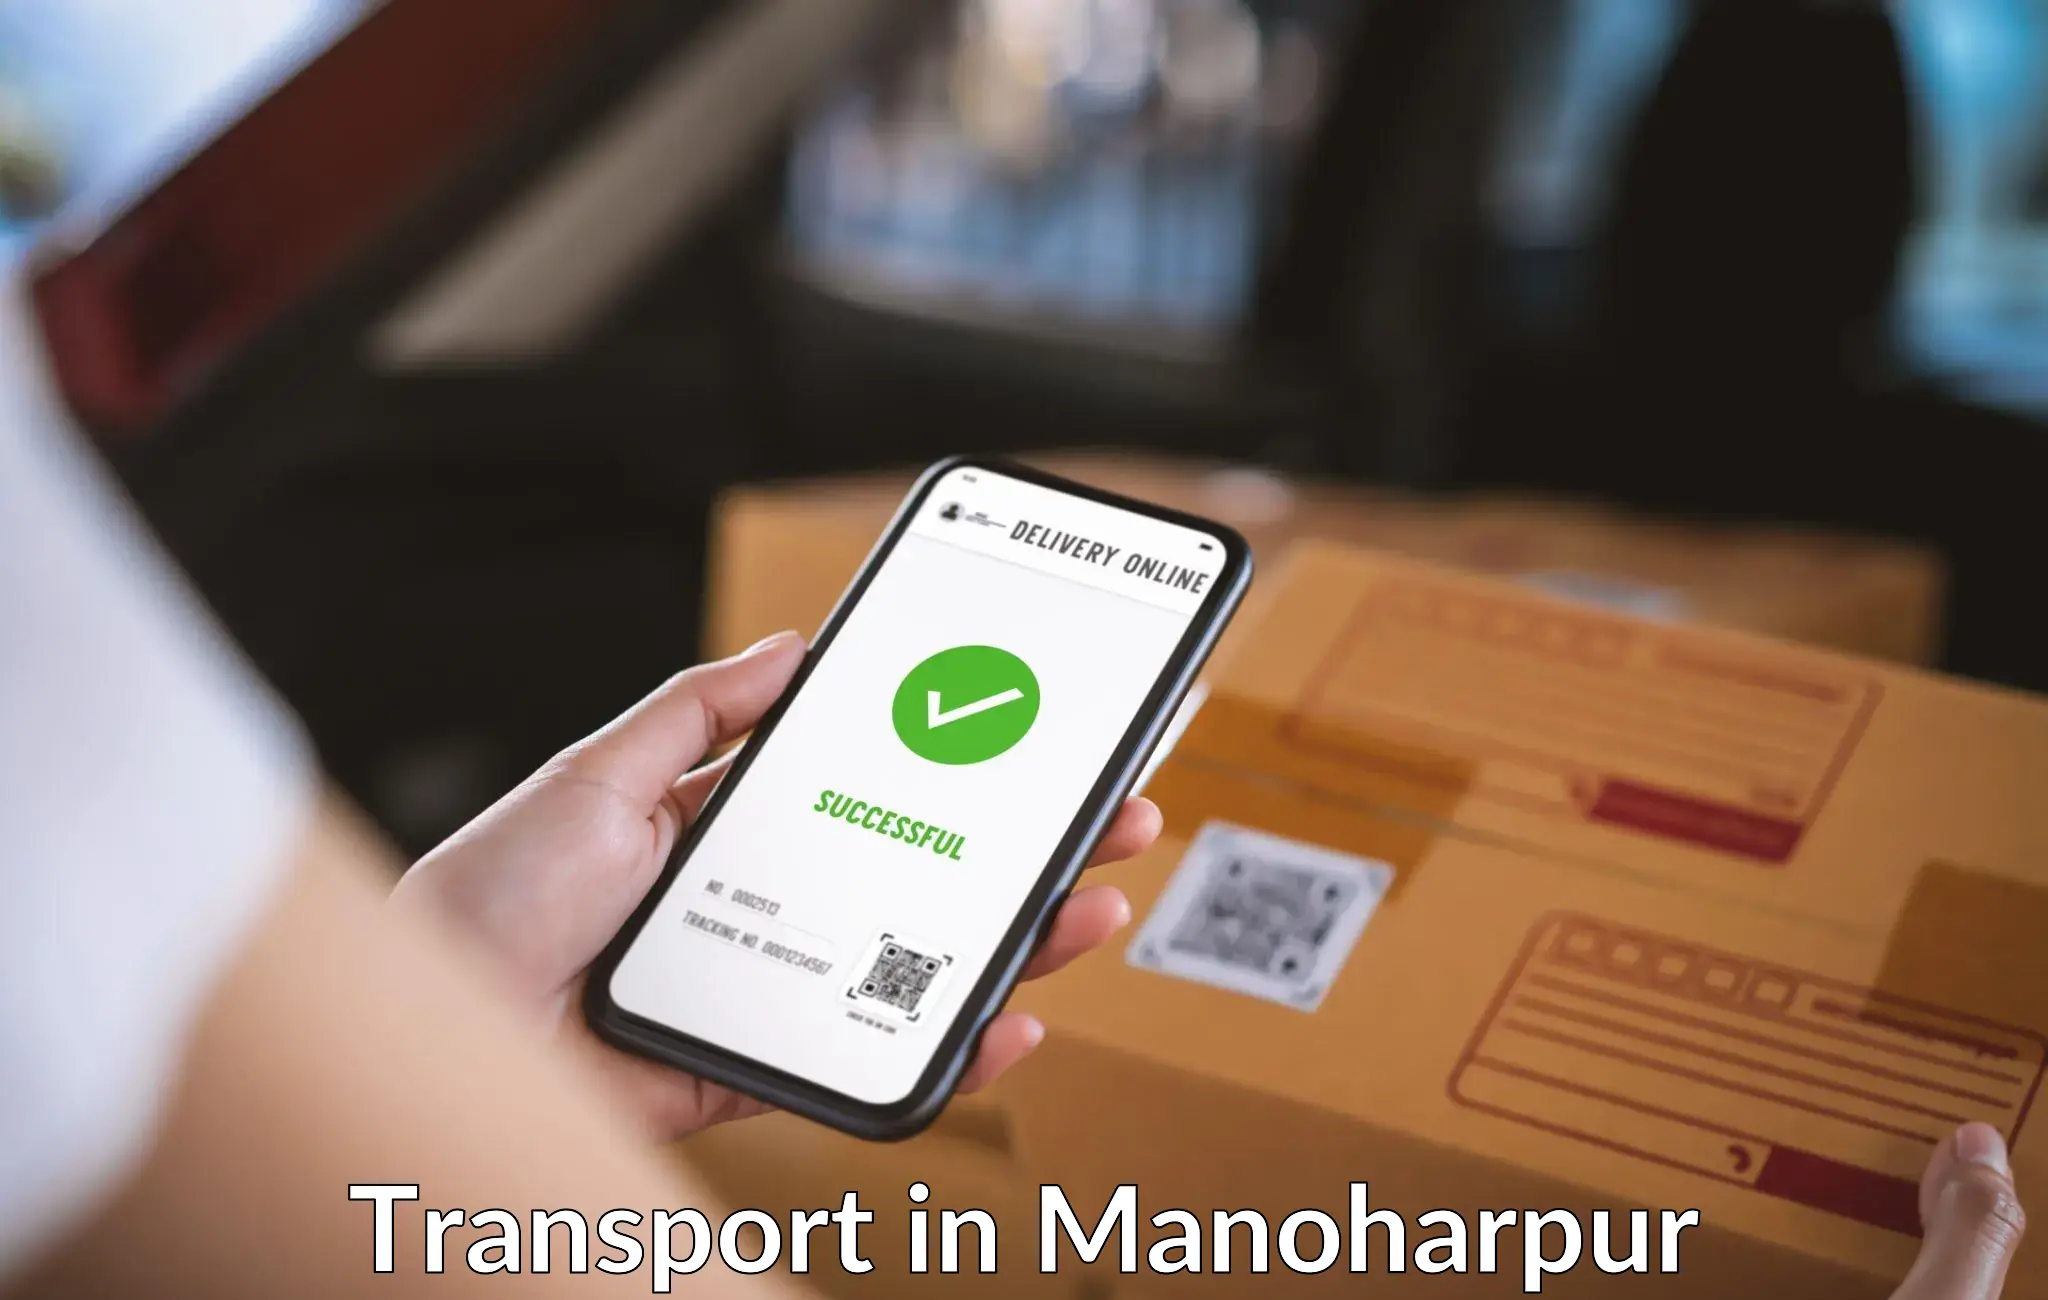 Express transport services in Manoharpur